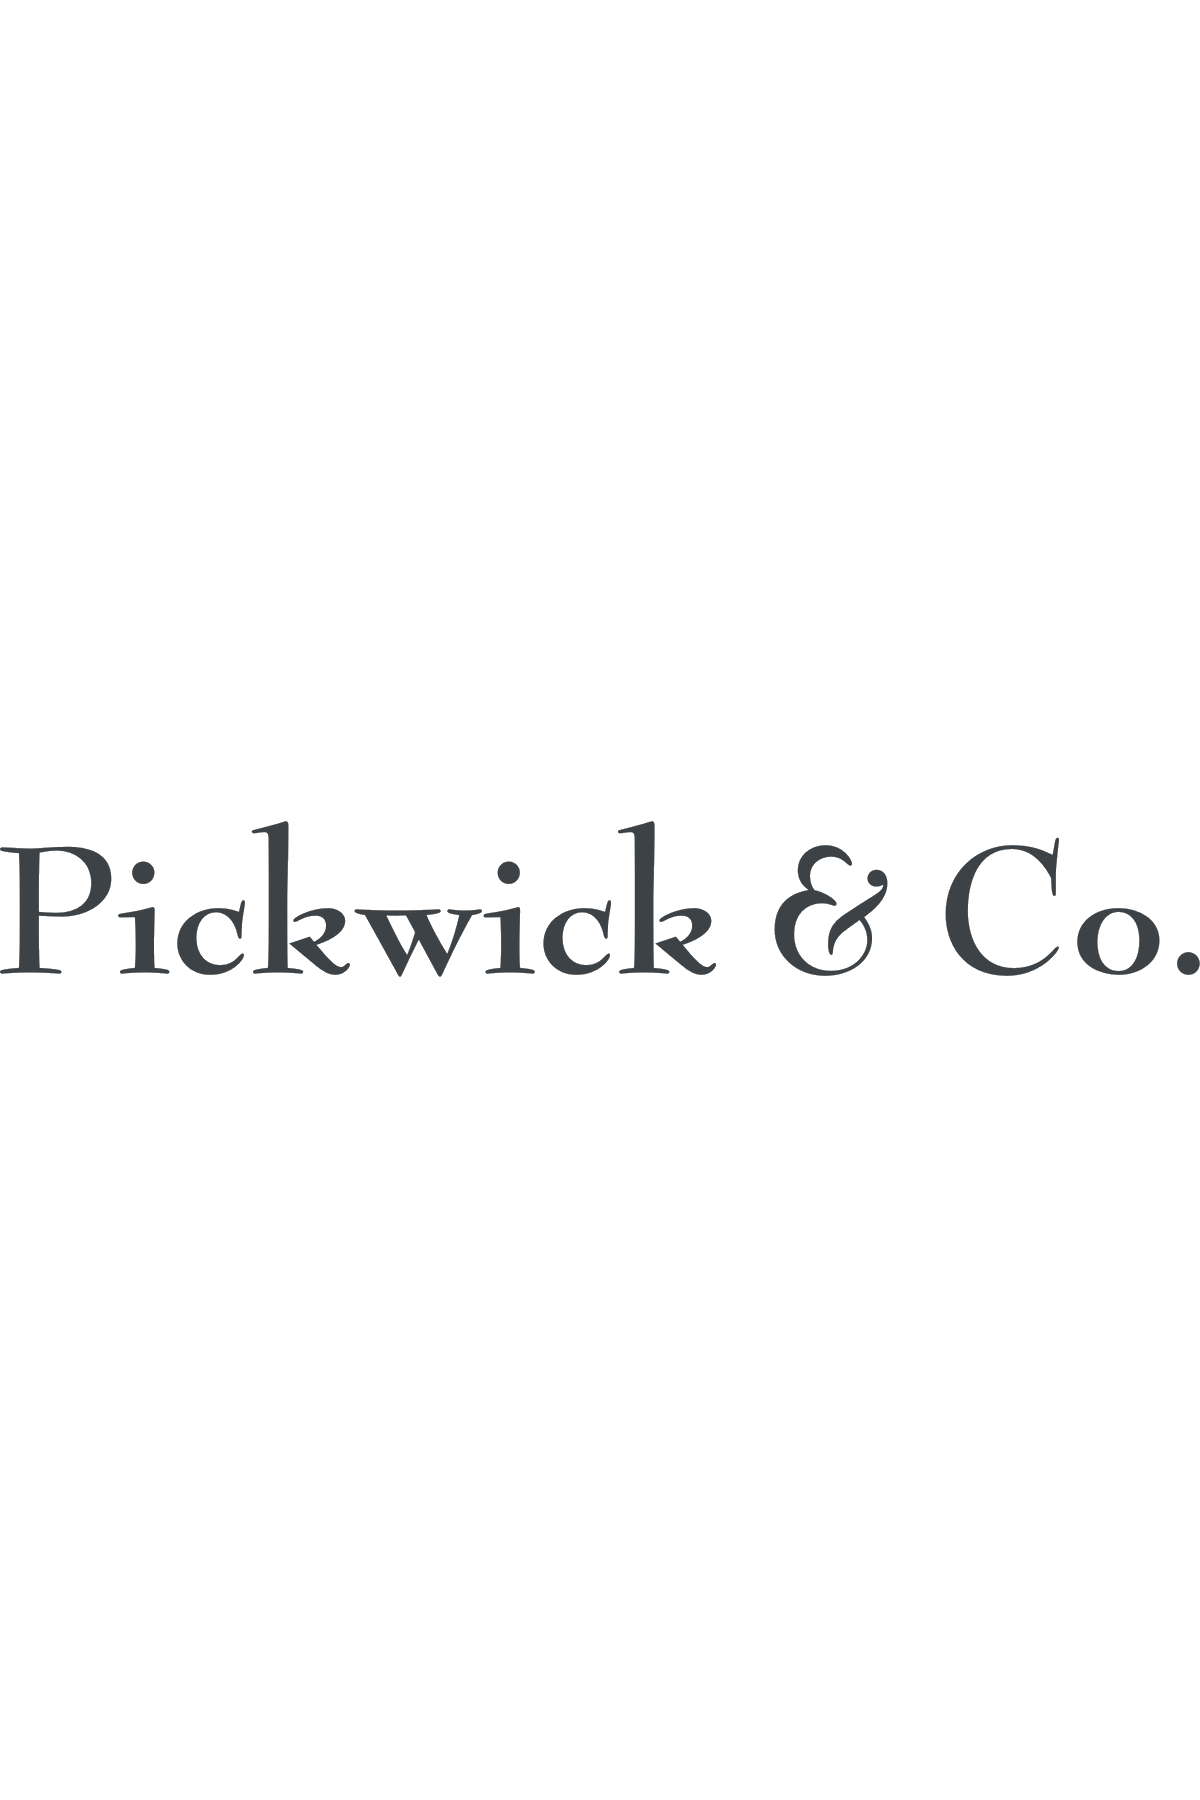 Pickwick & Co. Candlemakers